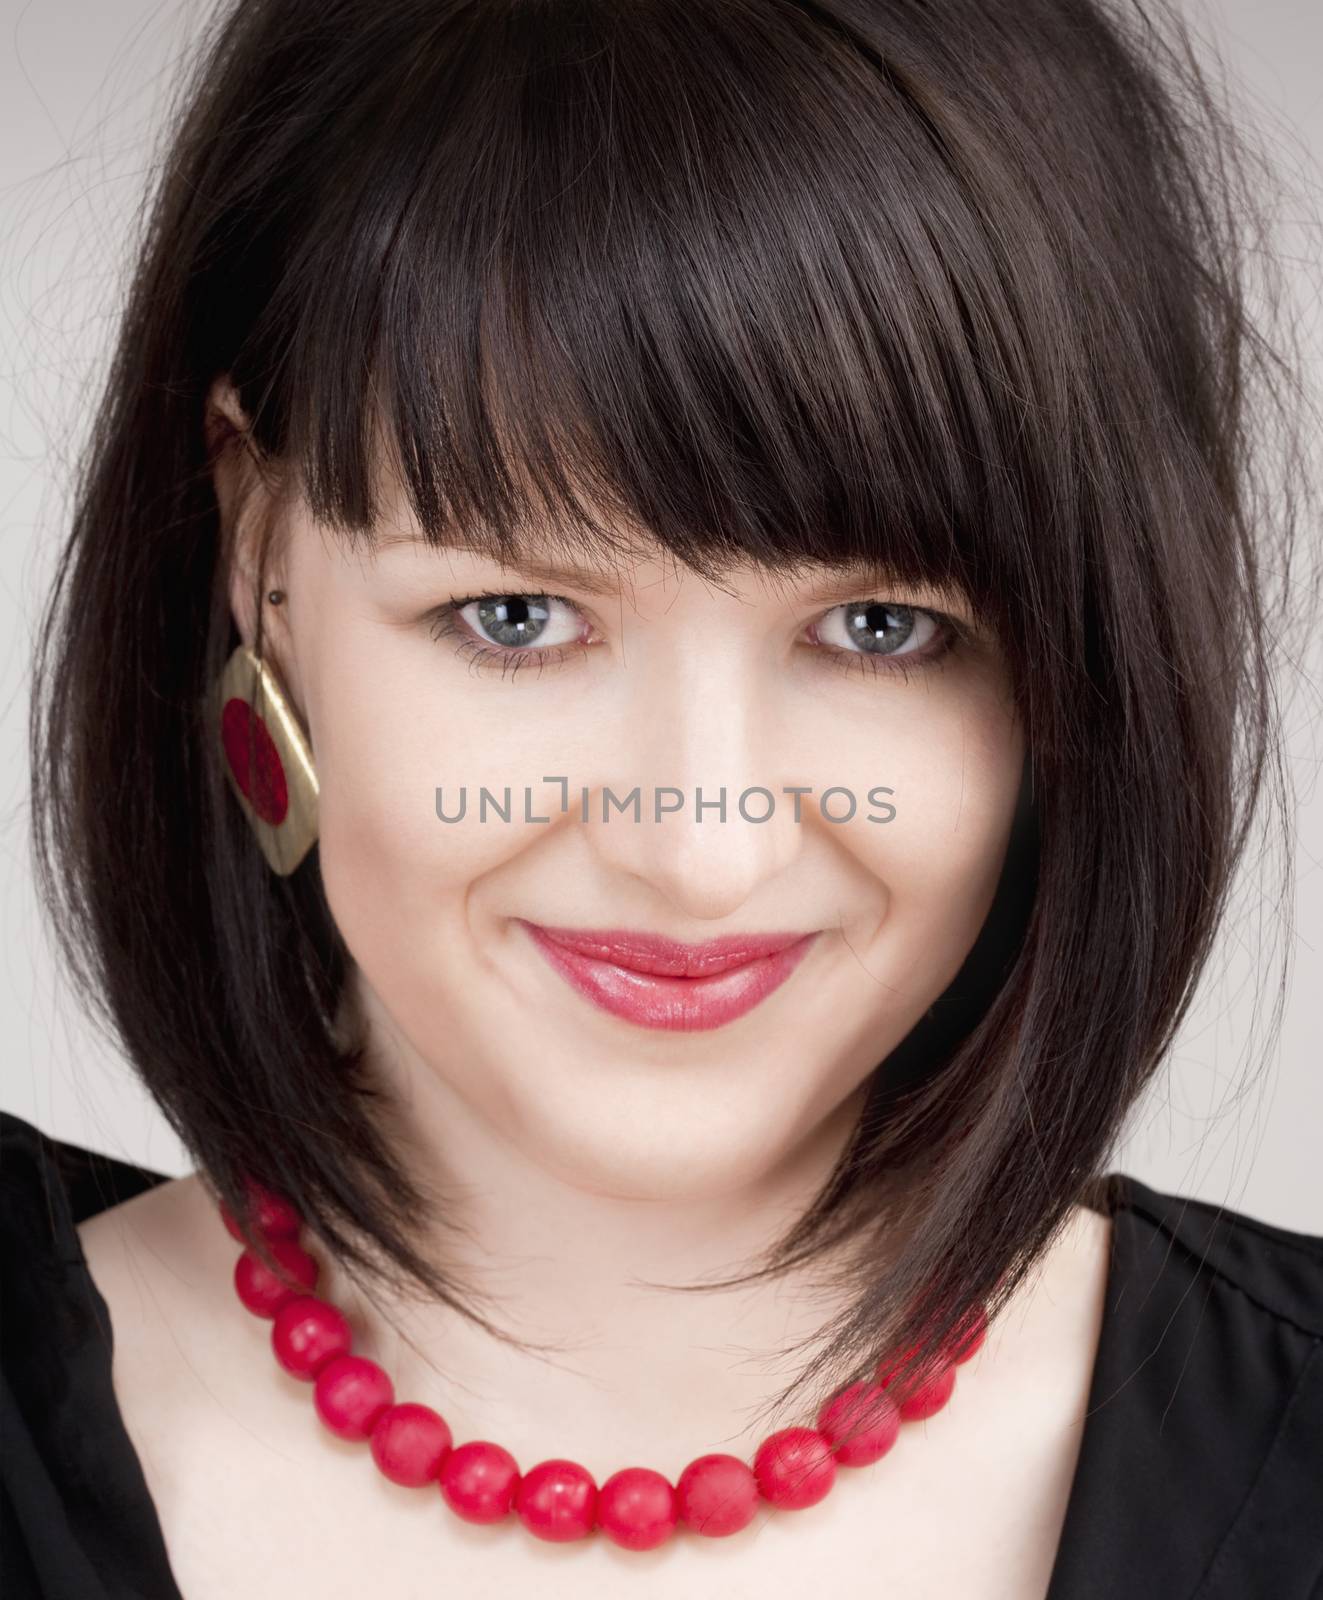 Portrait of a Young Beautiful Woman with Dark Brown Hair Looking